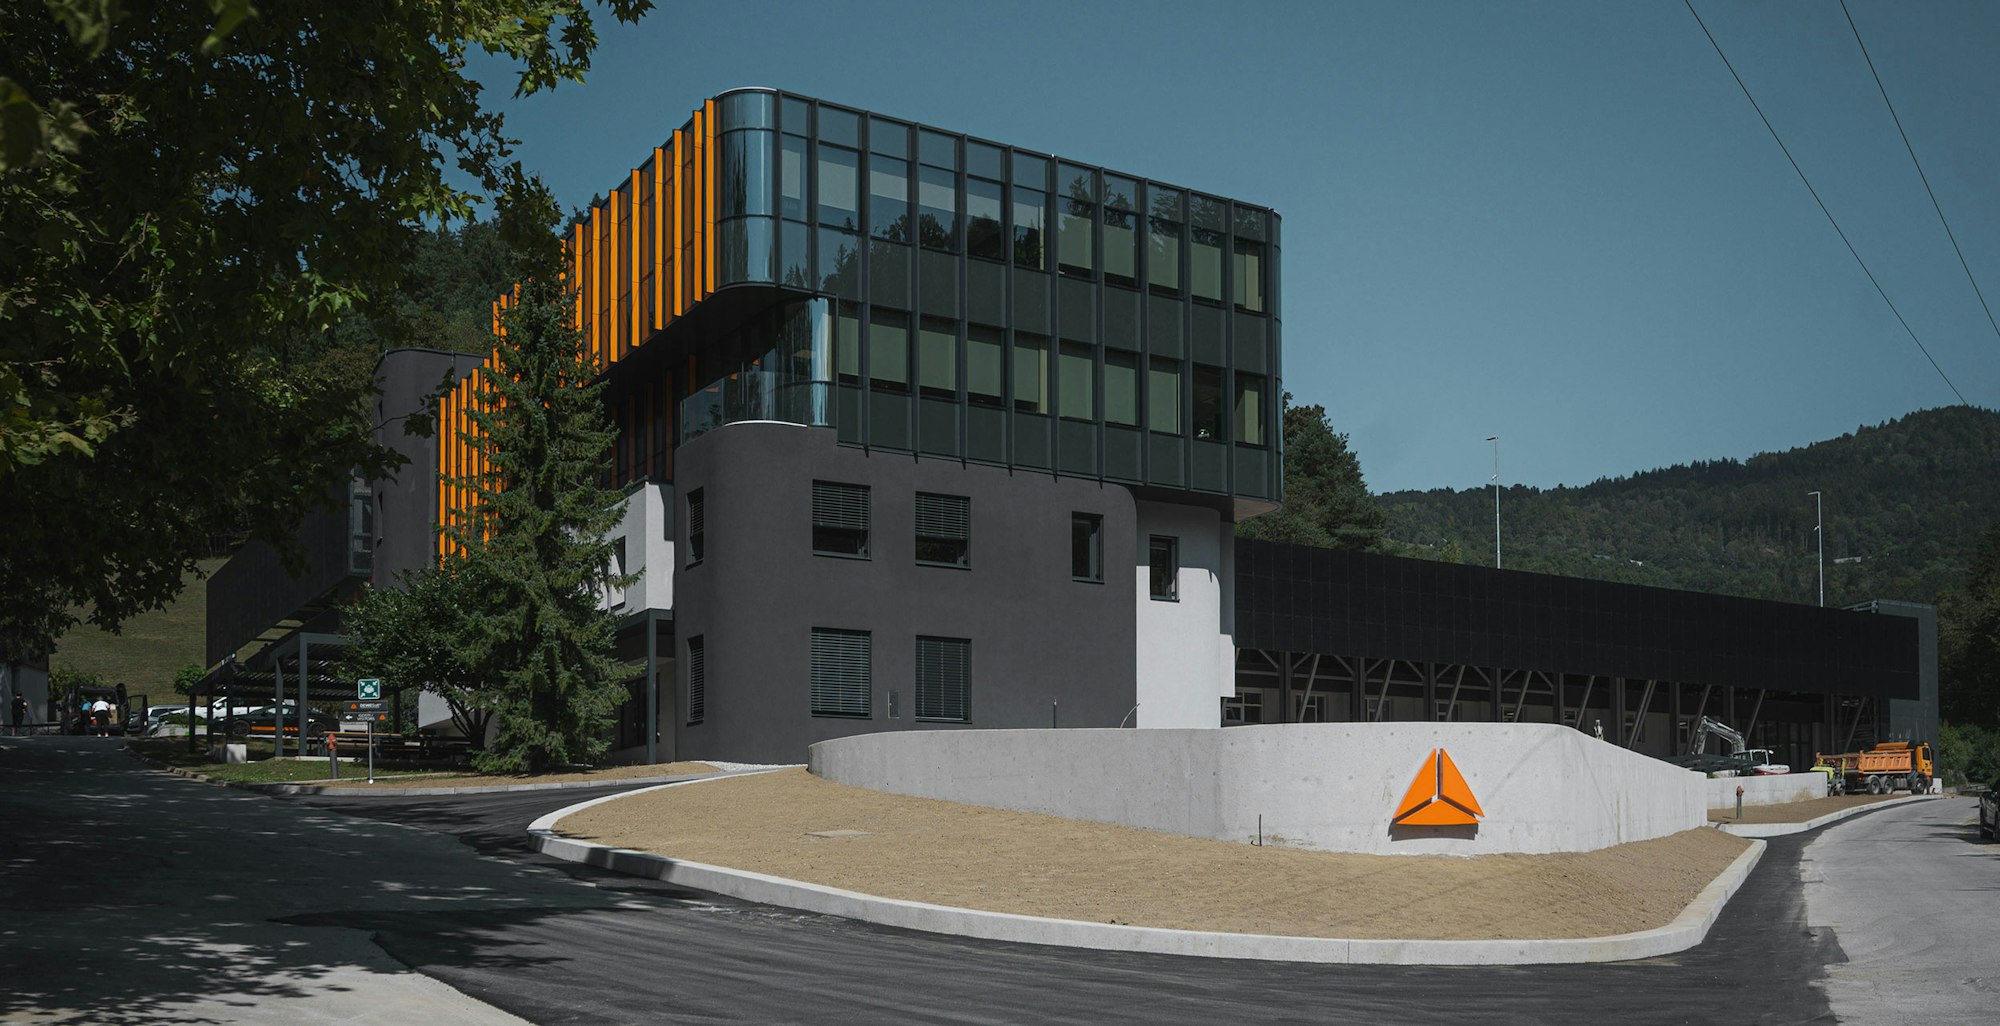 Dewesoft headqurters in Trbovlje with main building, production and surrounding